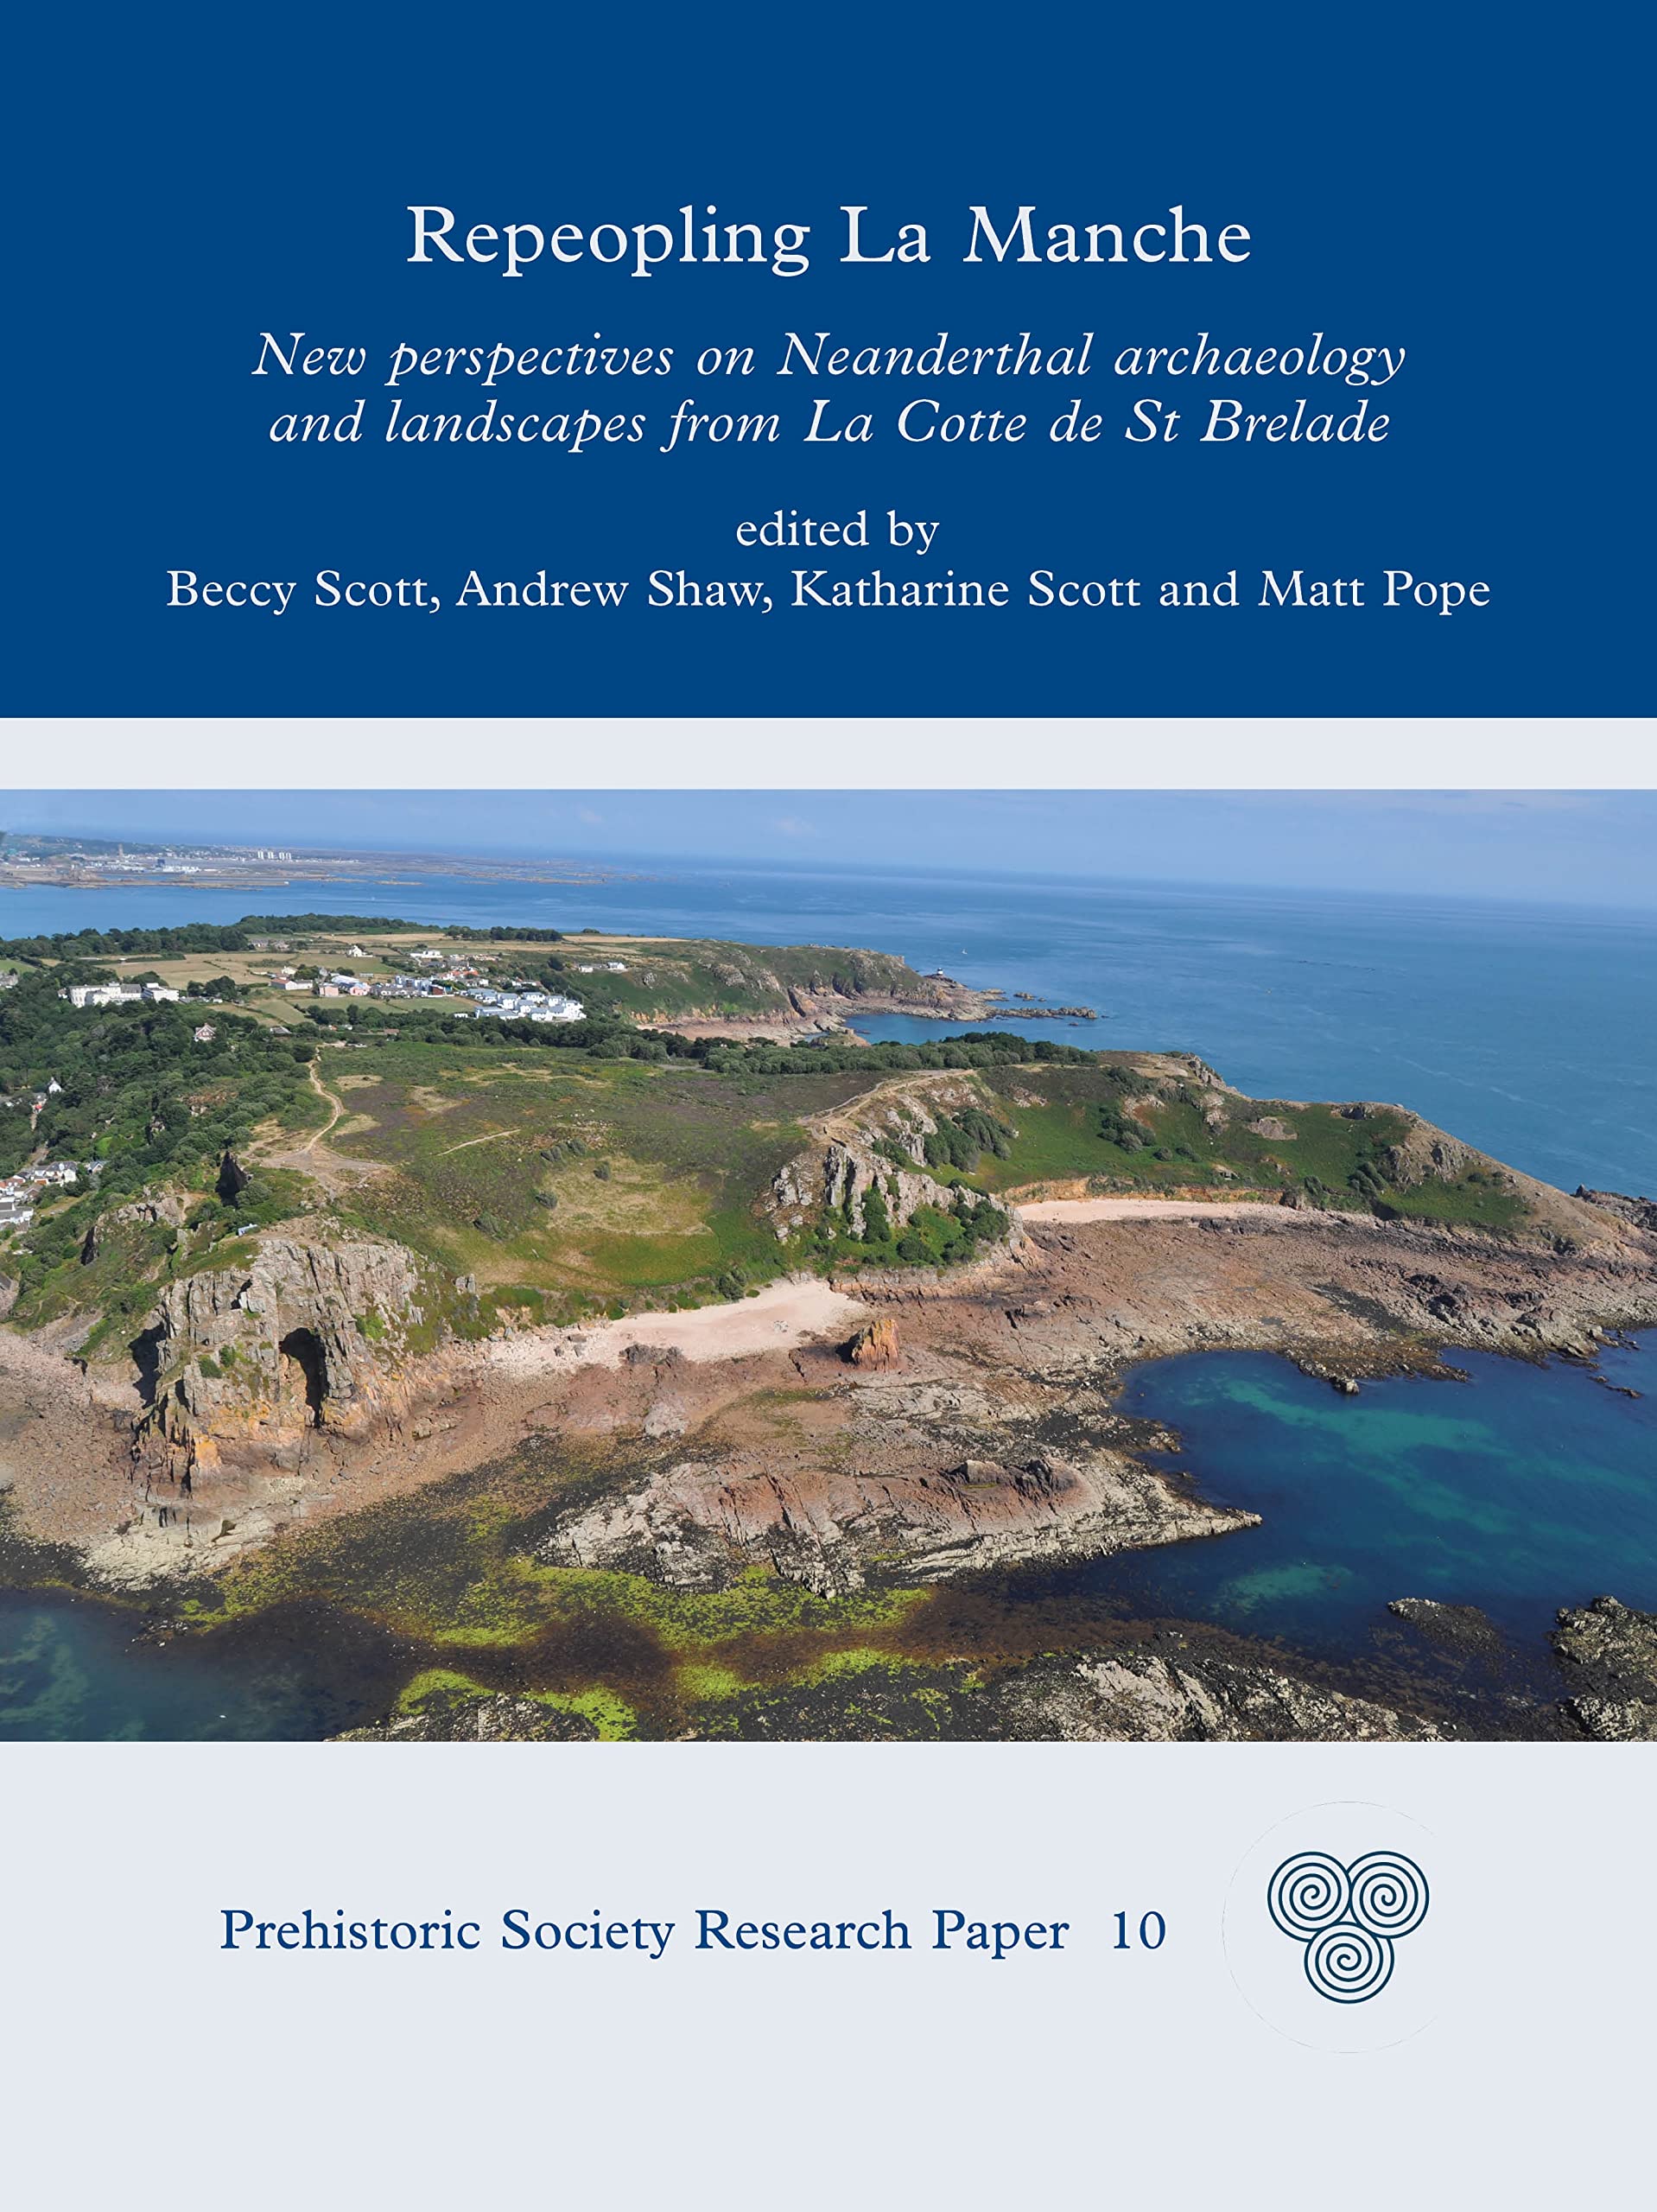 Repeopling La Manche. New Perspectives on Neanderthal Archaeology and Landscapes from La Cotte de St Brelade, 2023, 224 p.